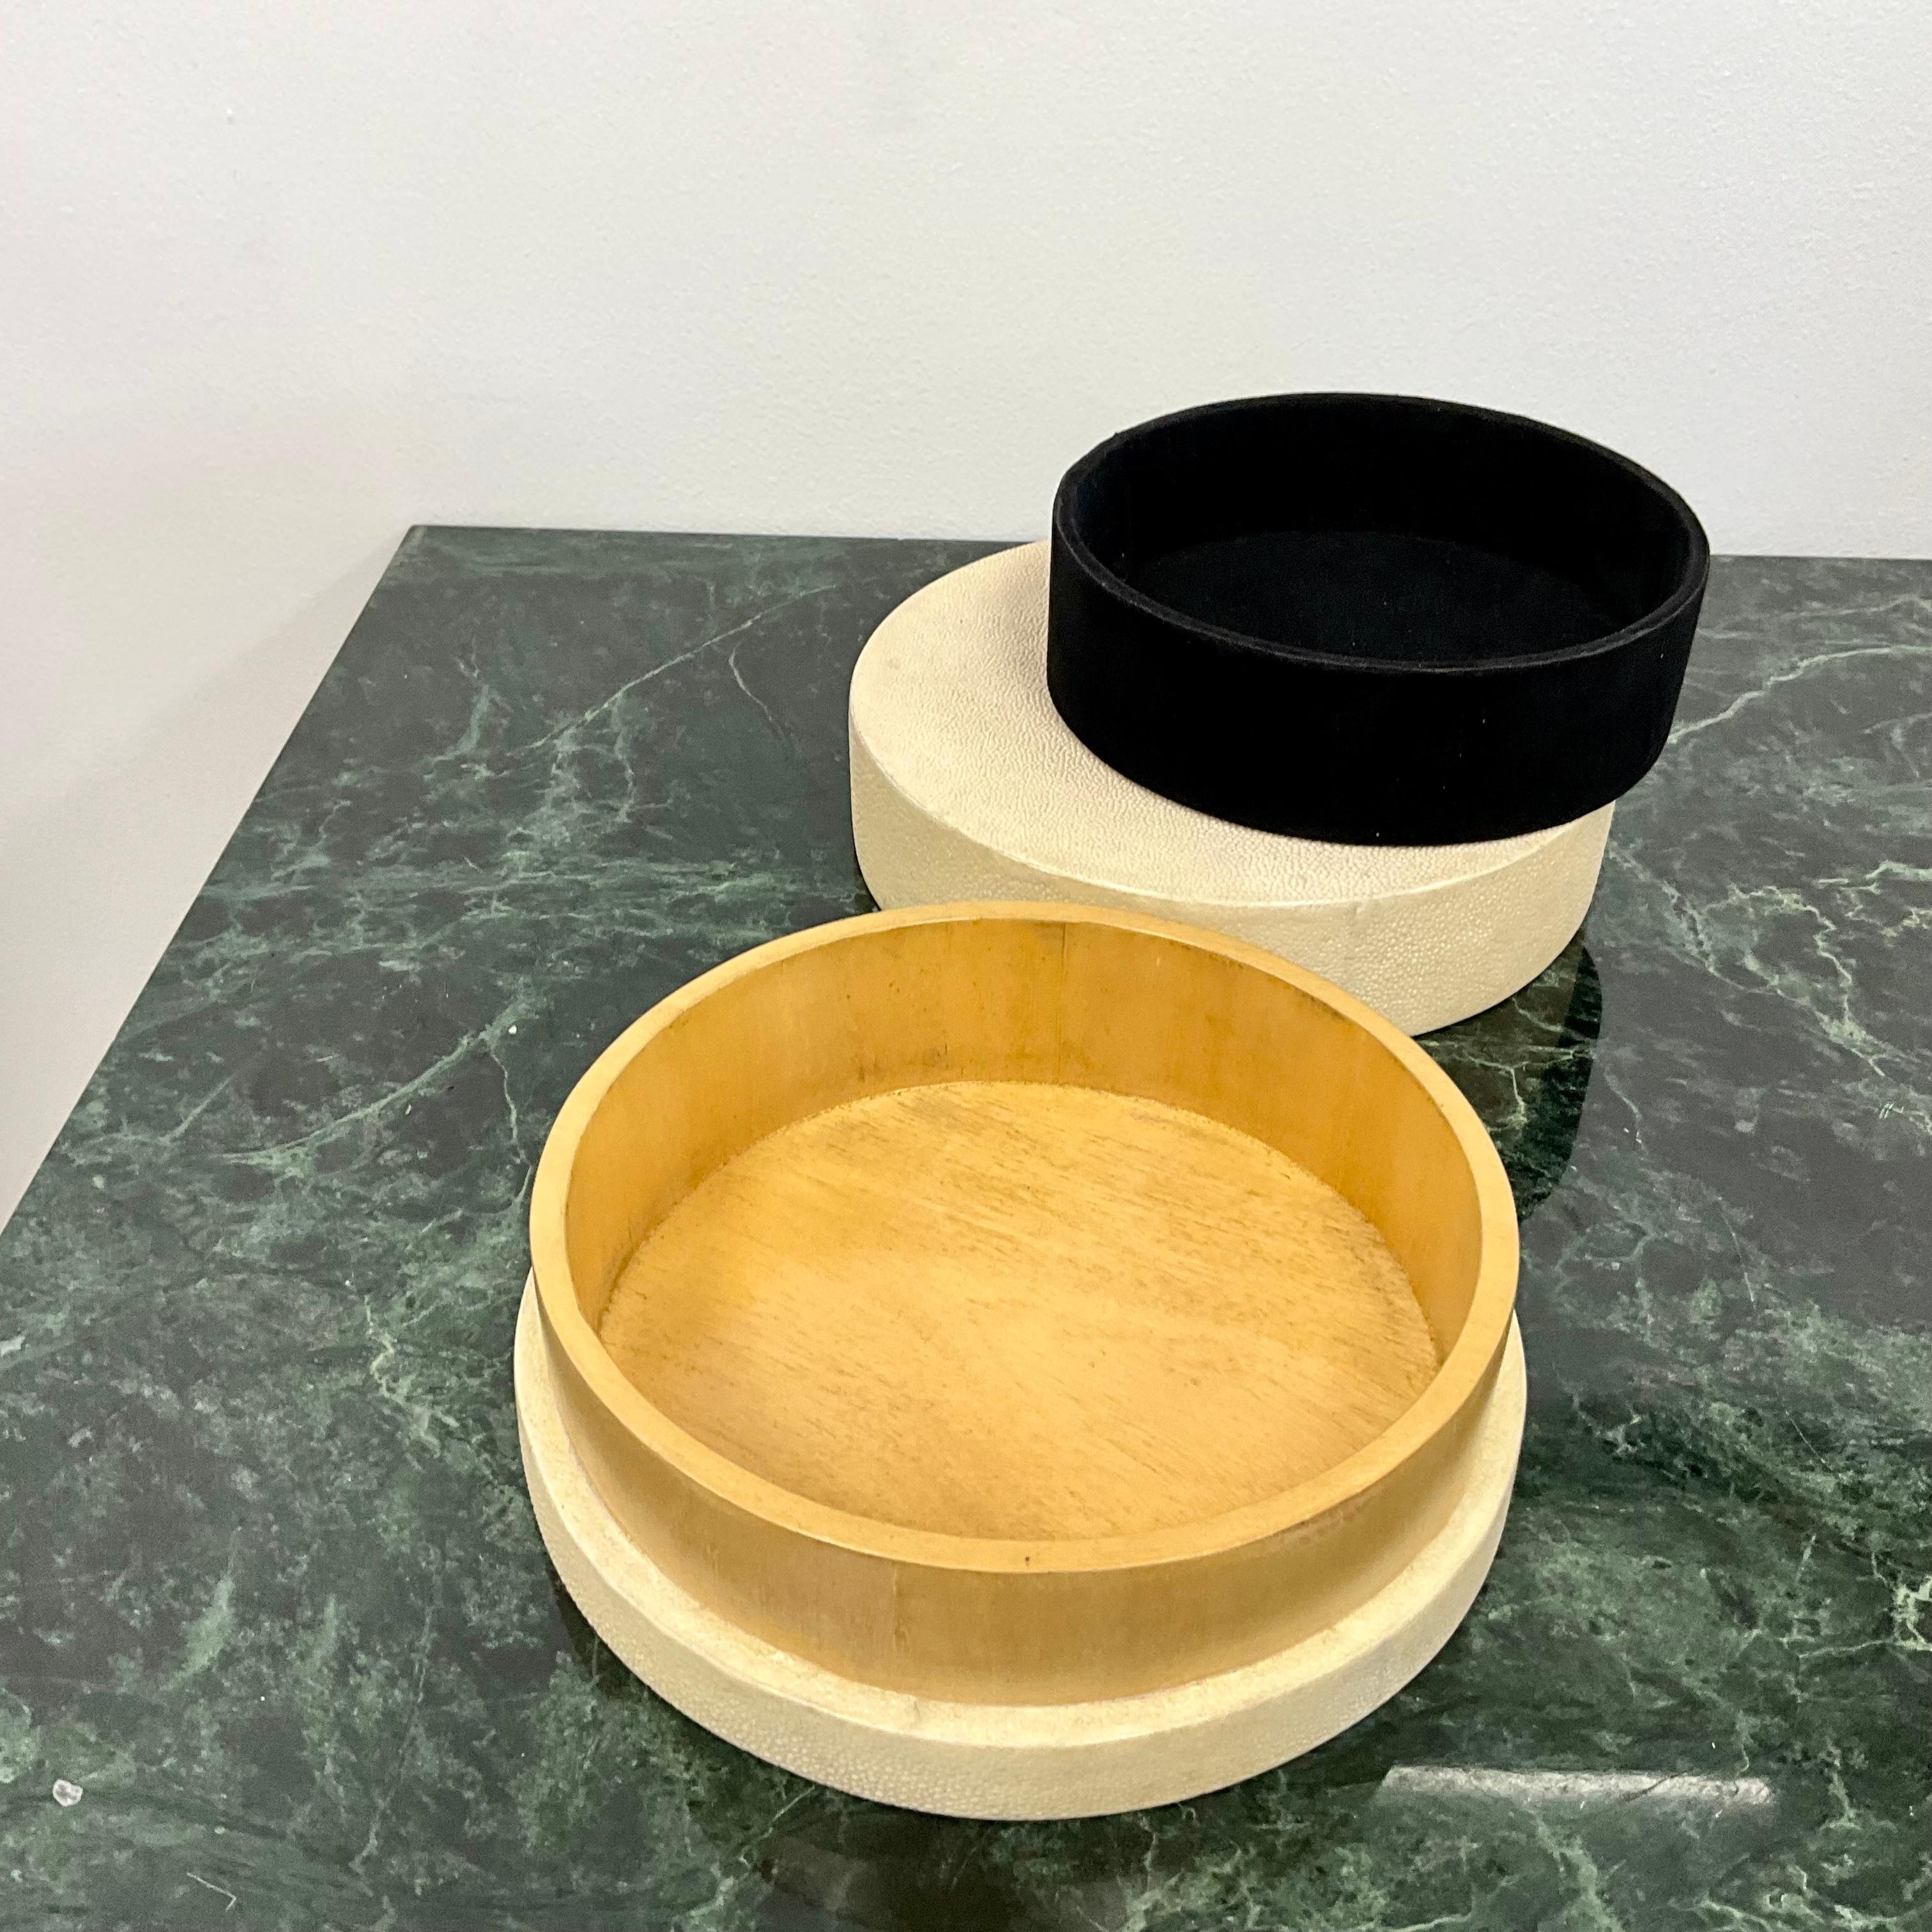 Circular lidded wood box covered in ivory colored Shagreen from R & Y  Augousti.  The interior having a felt removable liner.  Measuring 7.25” diameter x 3” high.

R&Y Augousti was founded in 1989 by husband and wife duo Rita & Yiouri Augousti. 